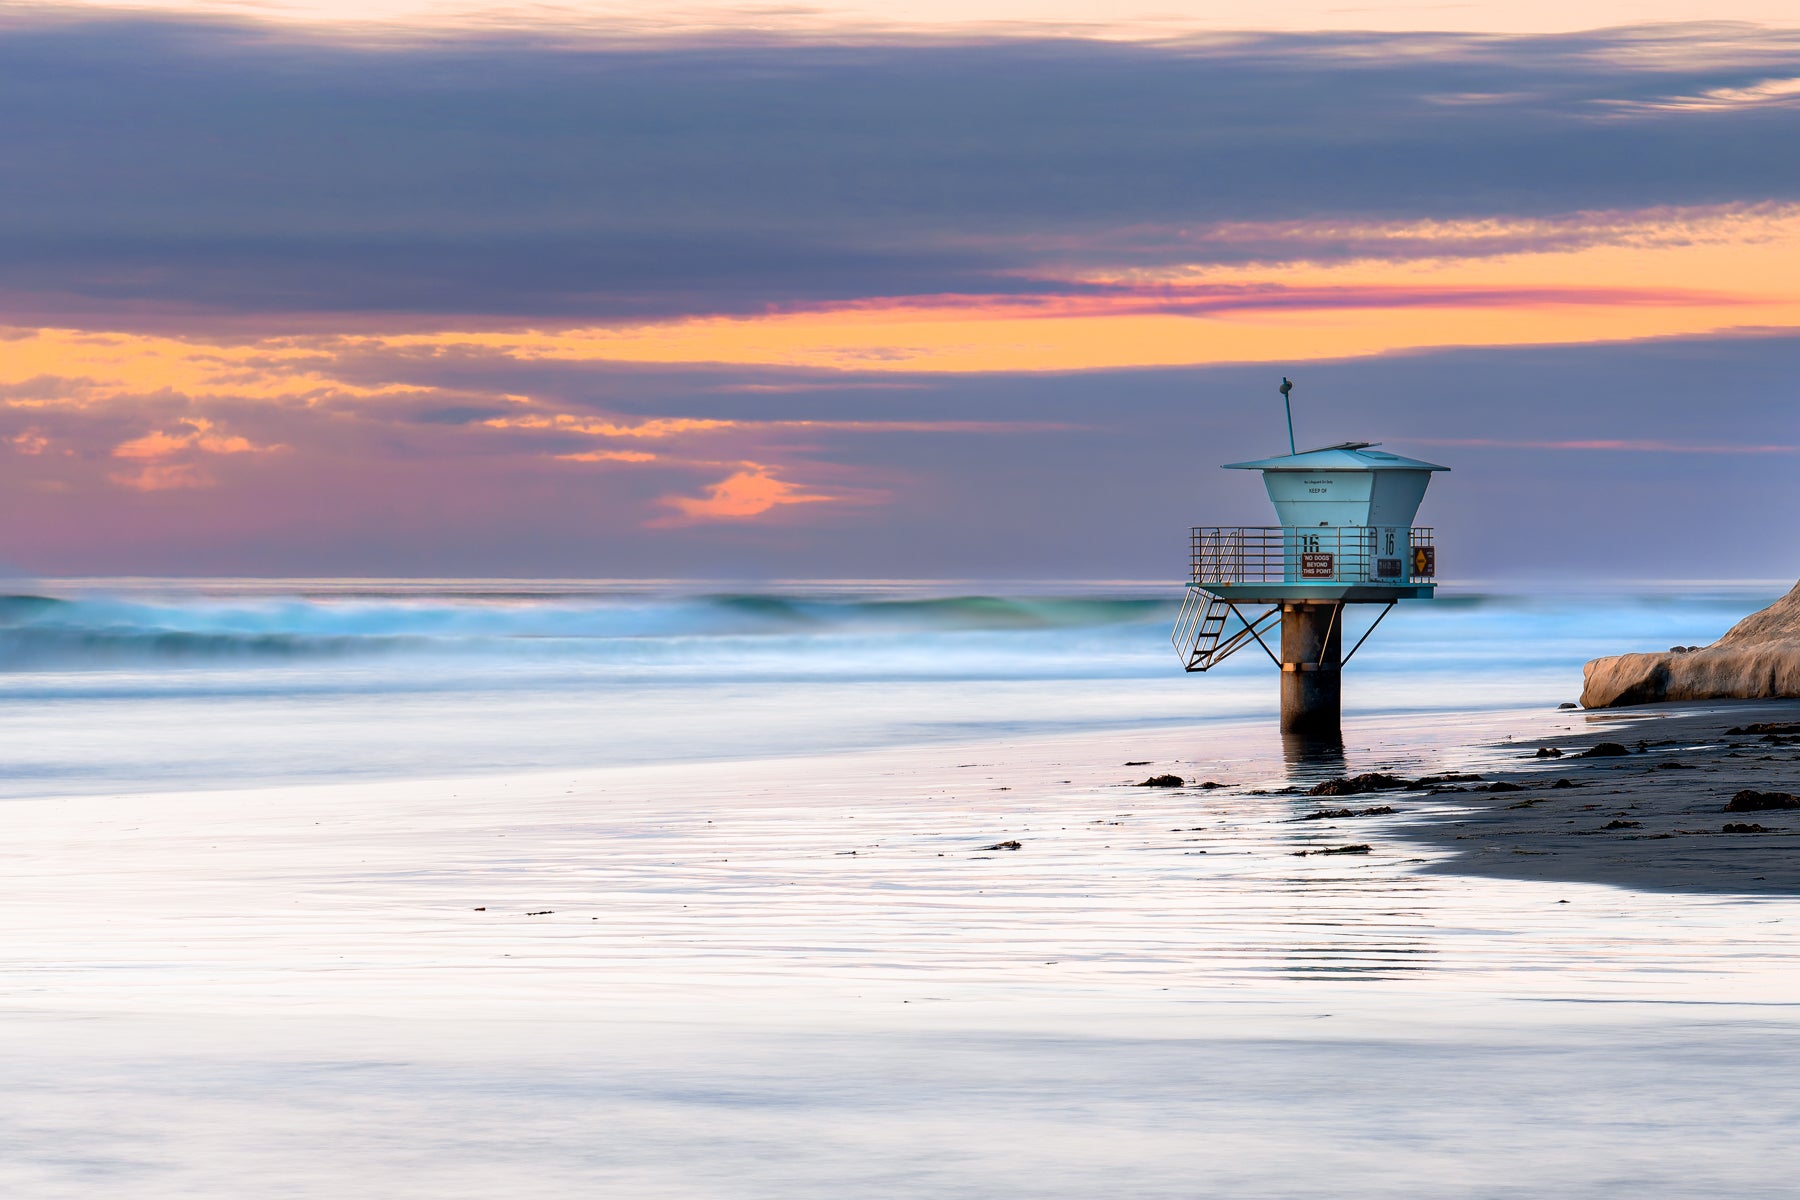 "End of Day" Cardiff By the Sea, Encinitas, CA